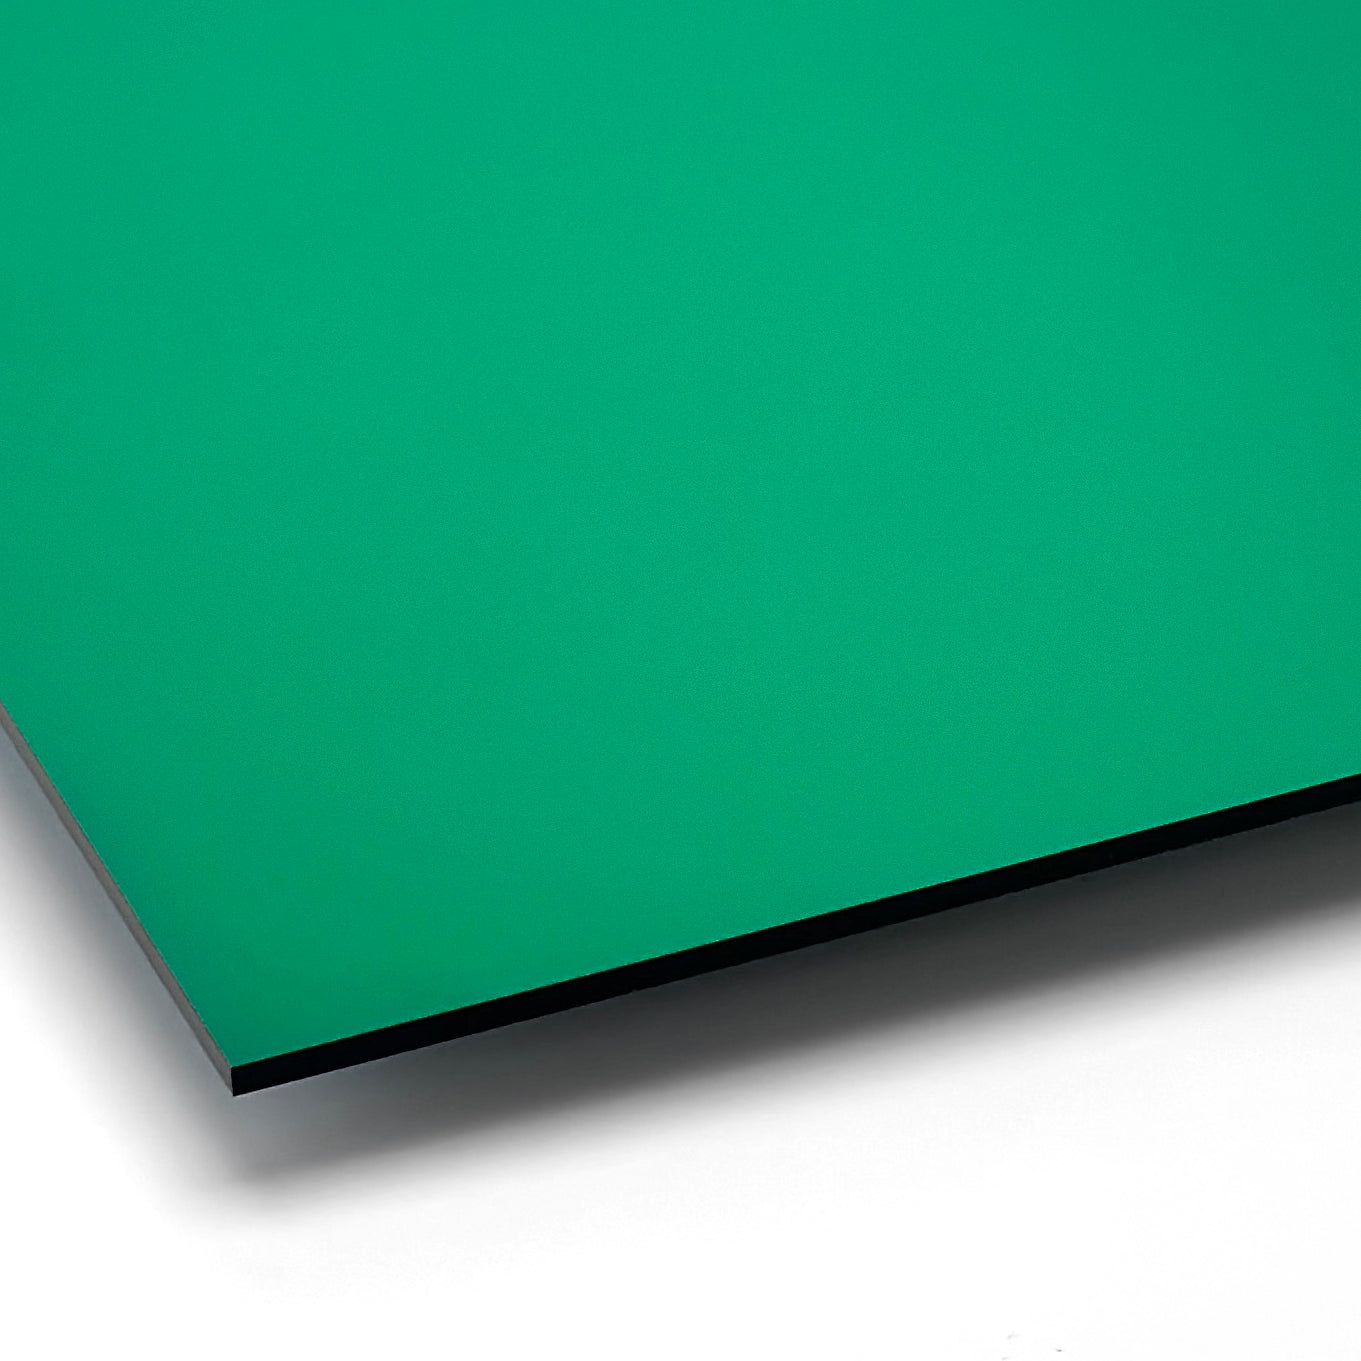 Mirror Green Acrylic with laser cutting & printing - 600x400mm